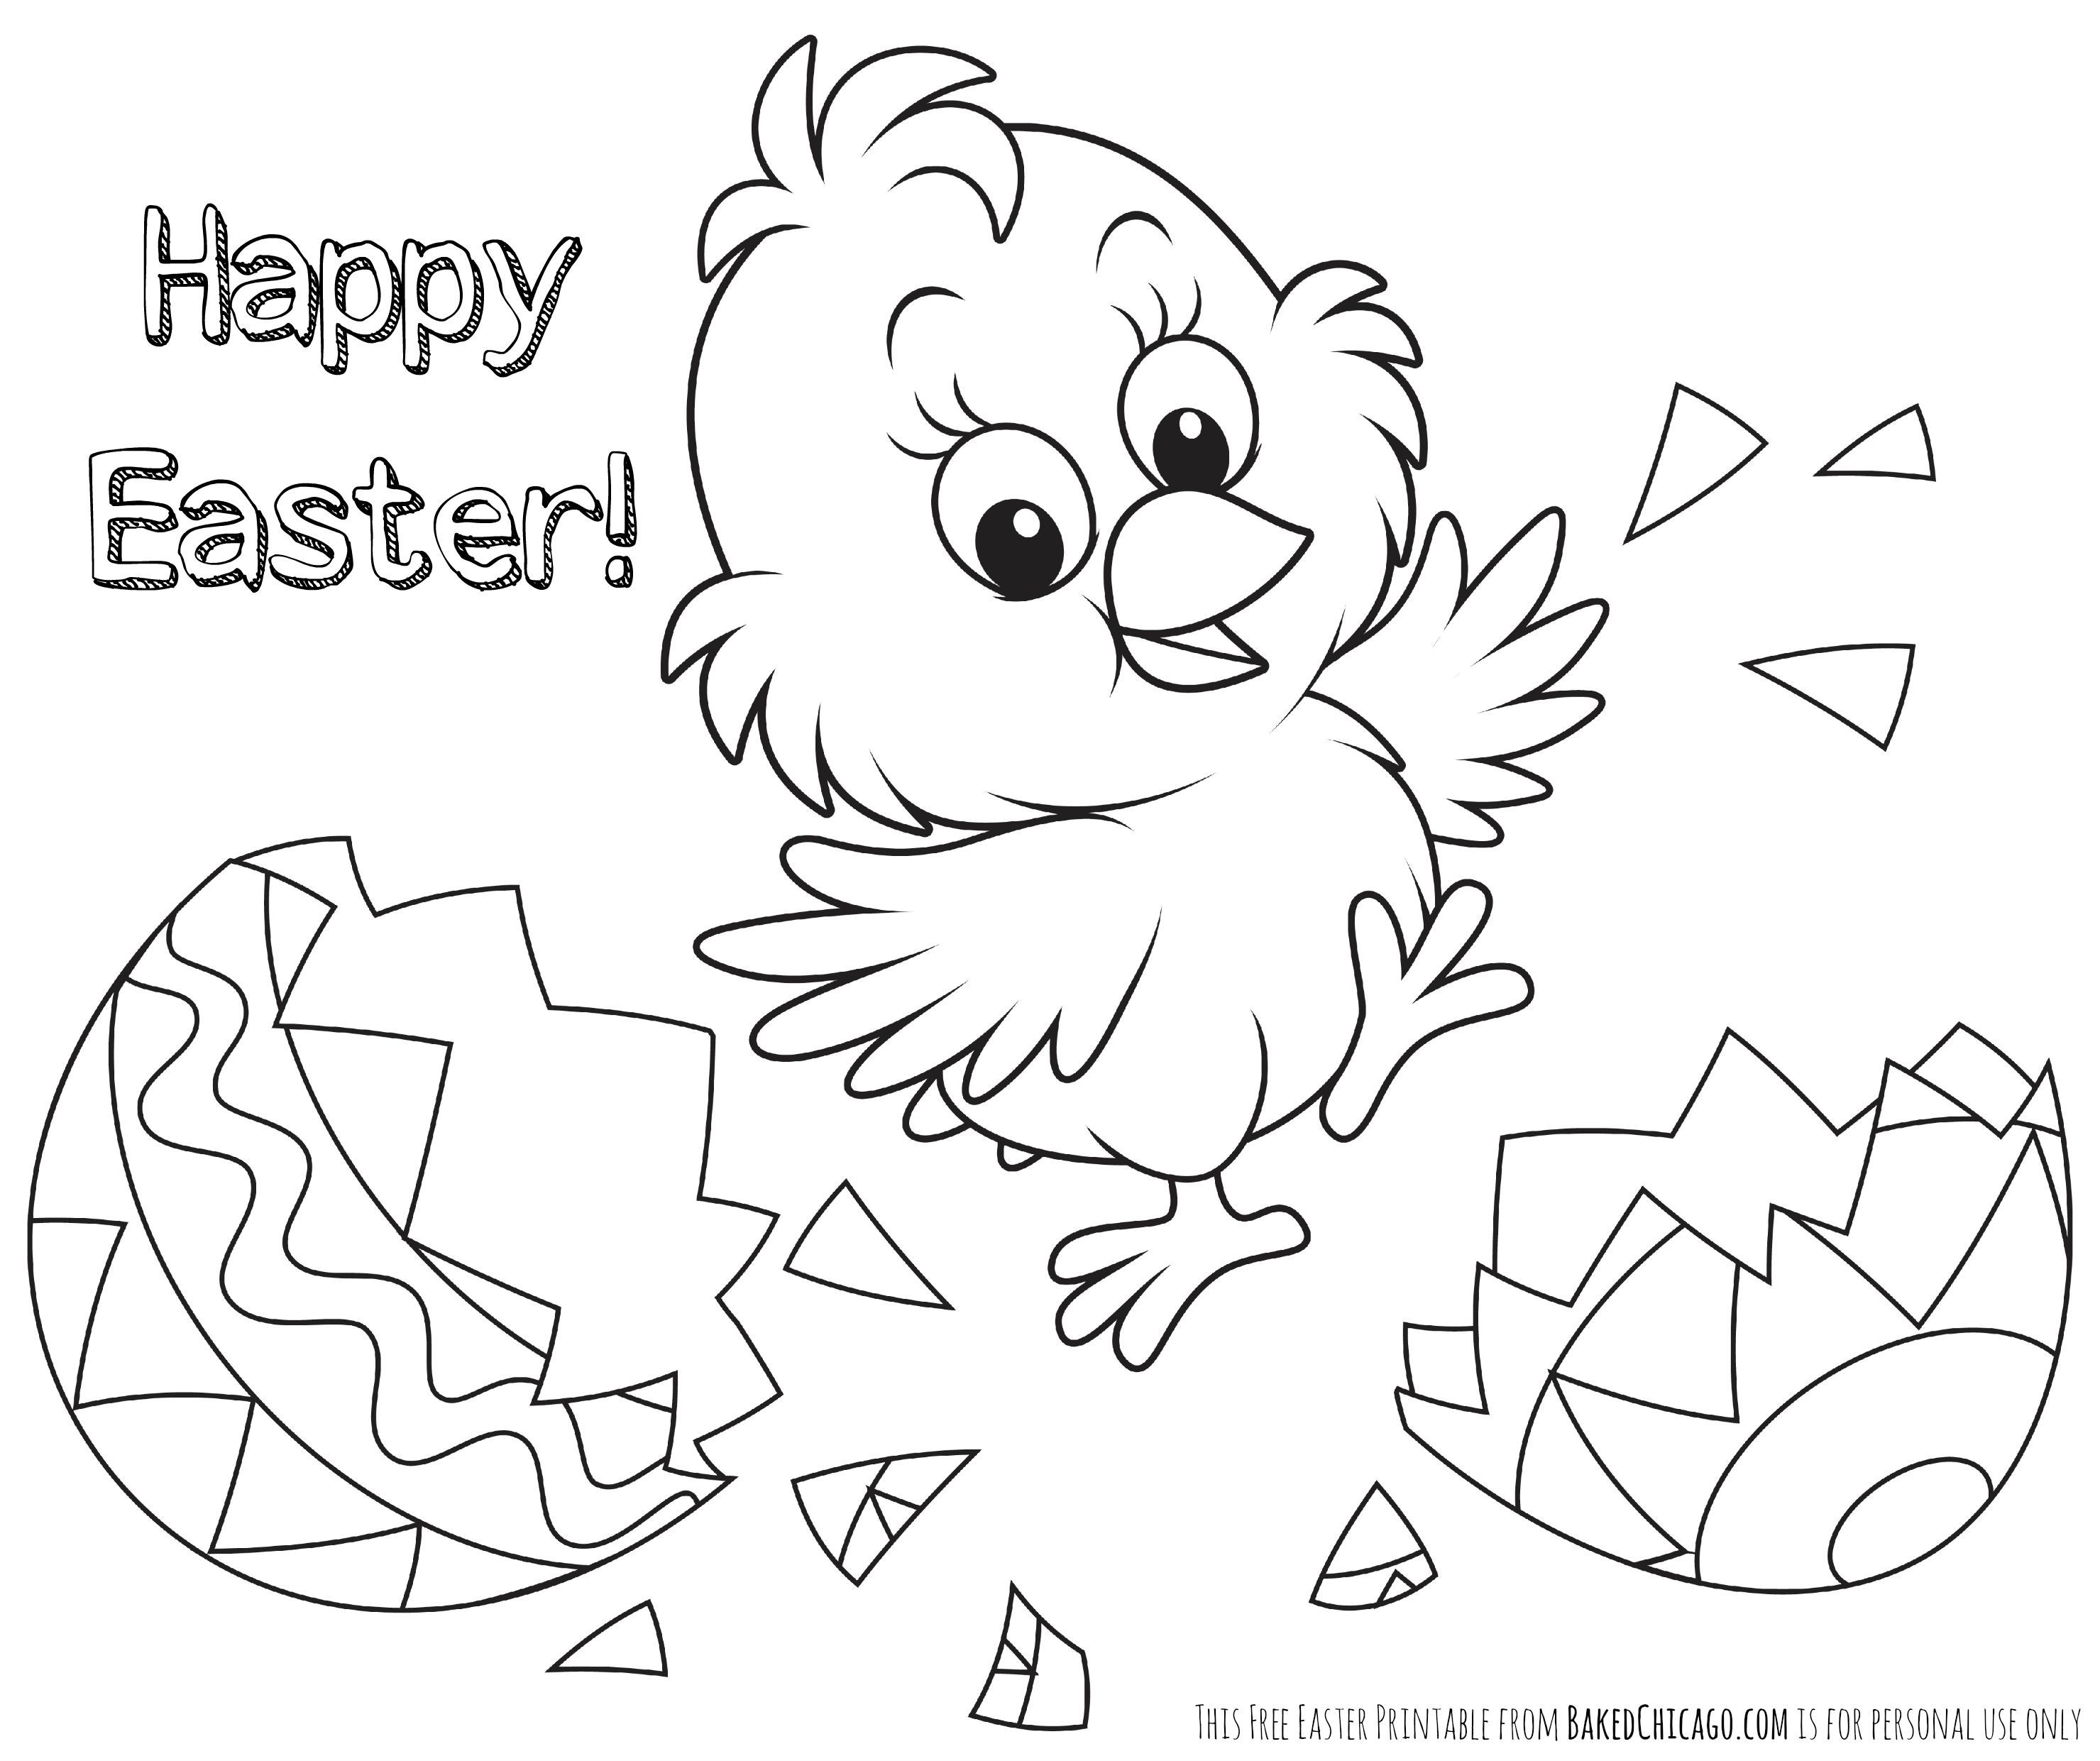 12 Free Printable Easter Coloring Pages | Topsailmultimedia - Easter Color Pages Free Printable